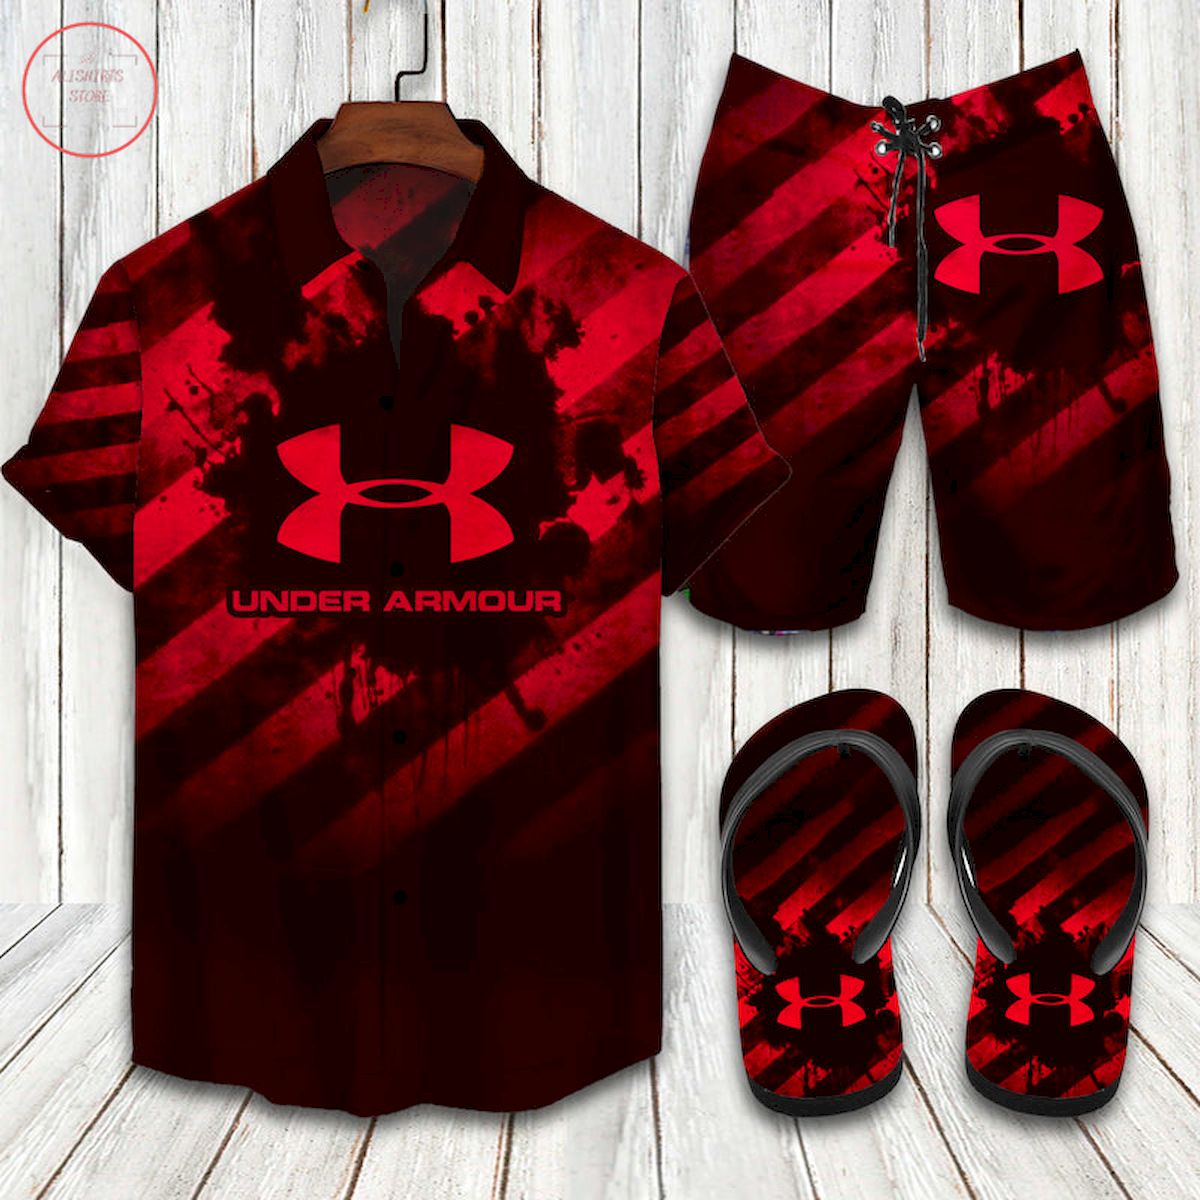 Under Armour Black and Red Hawaiian Shirt and Shorts